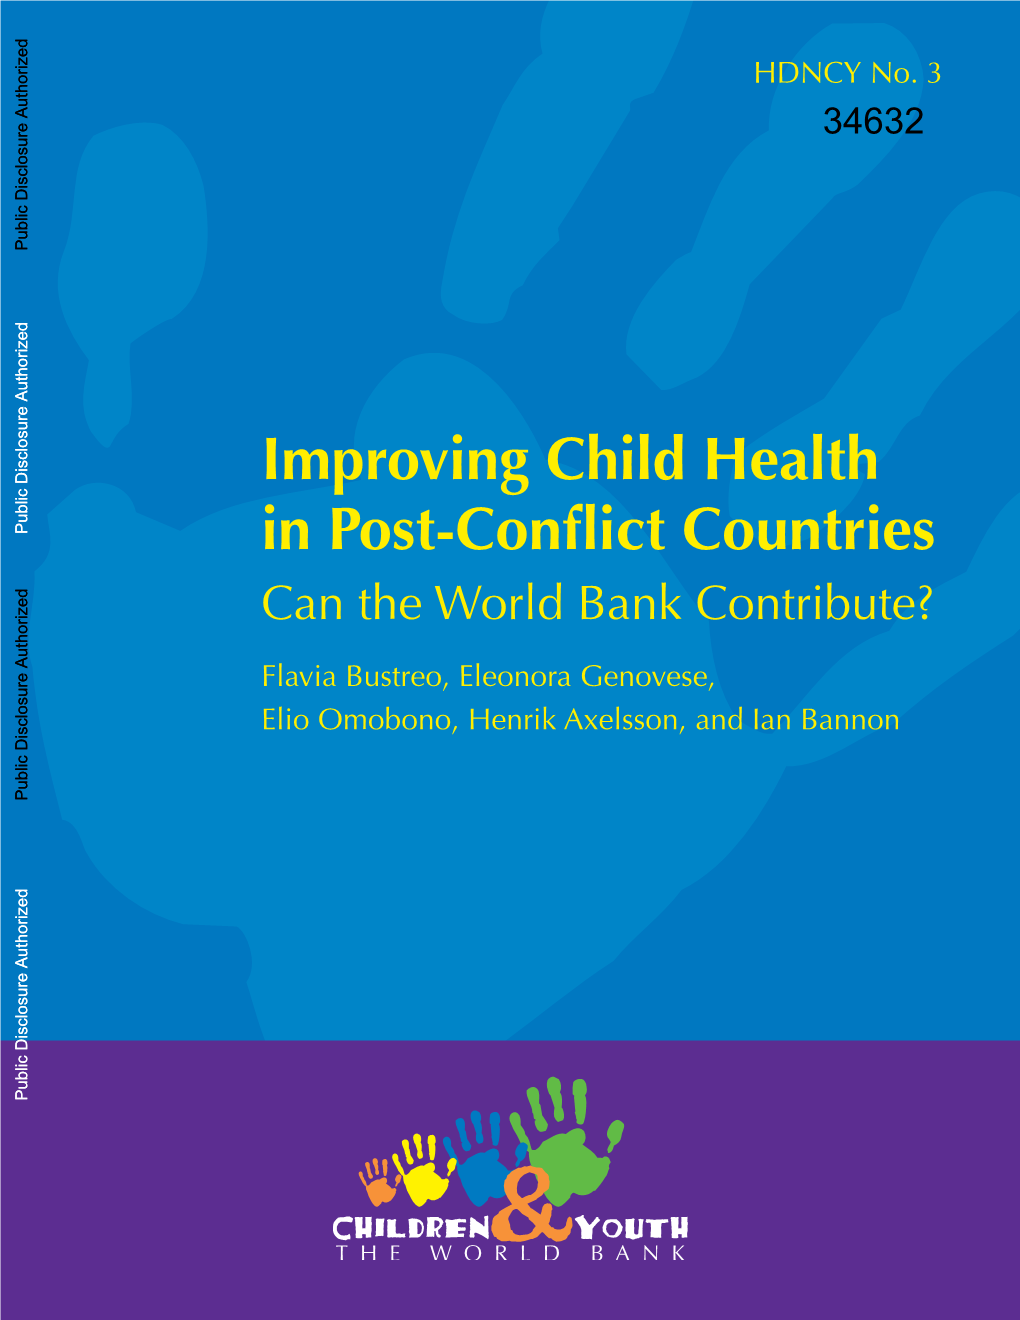 Improving Child Health in Post-Conflict Countries Can the World Bank Contribute?